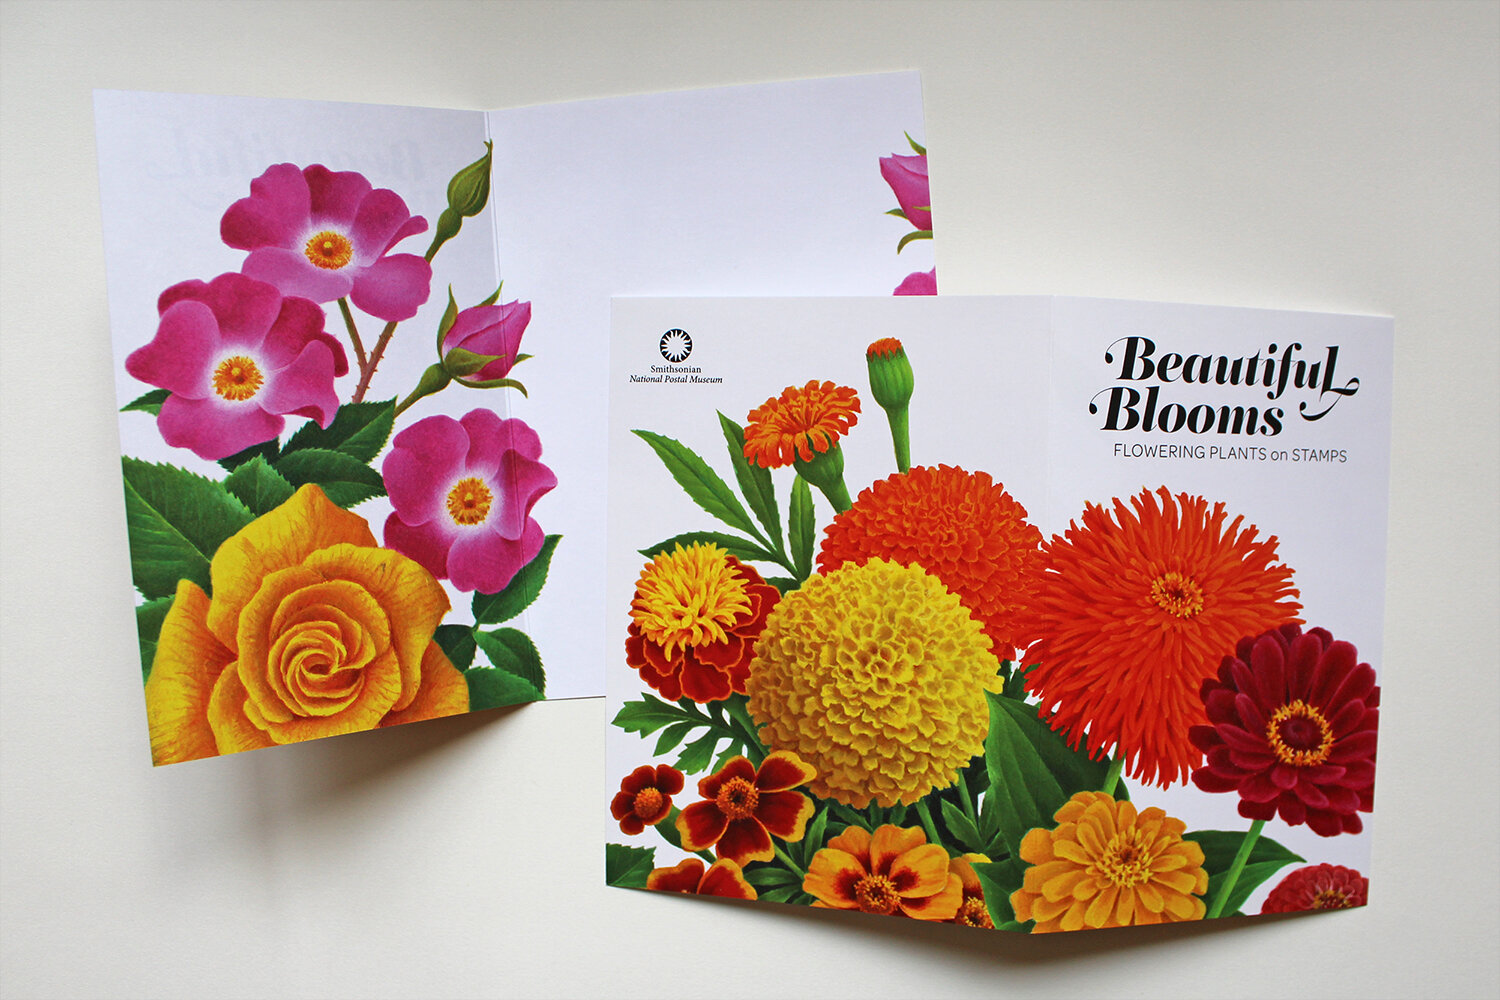 Beautiful Blooms: Flowering Plants on Stamps